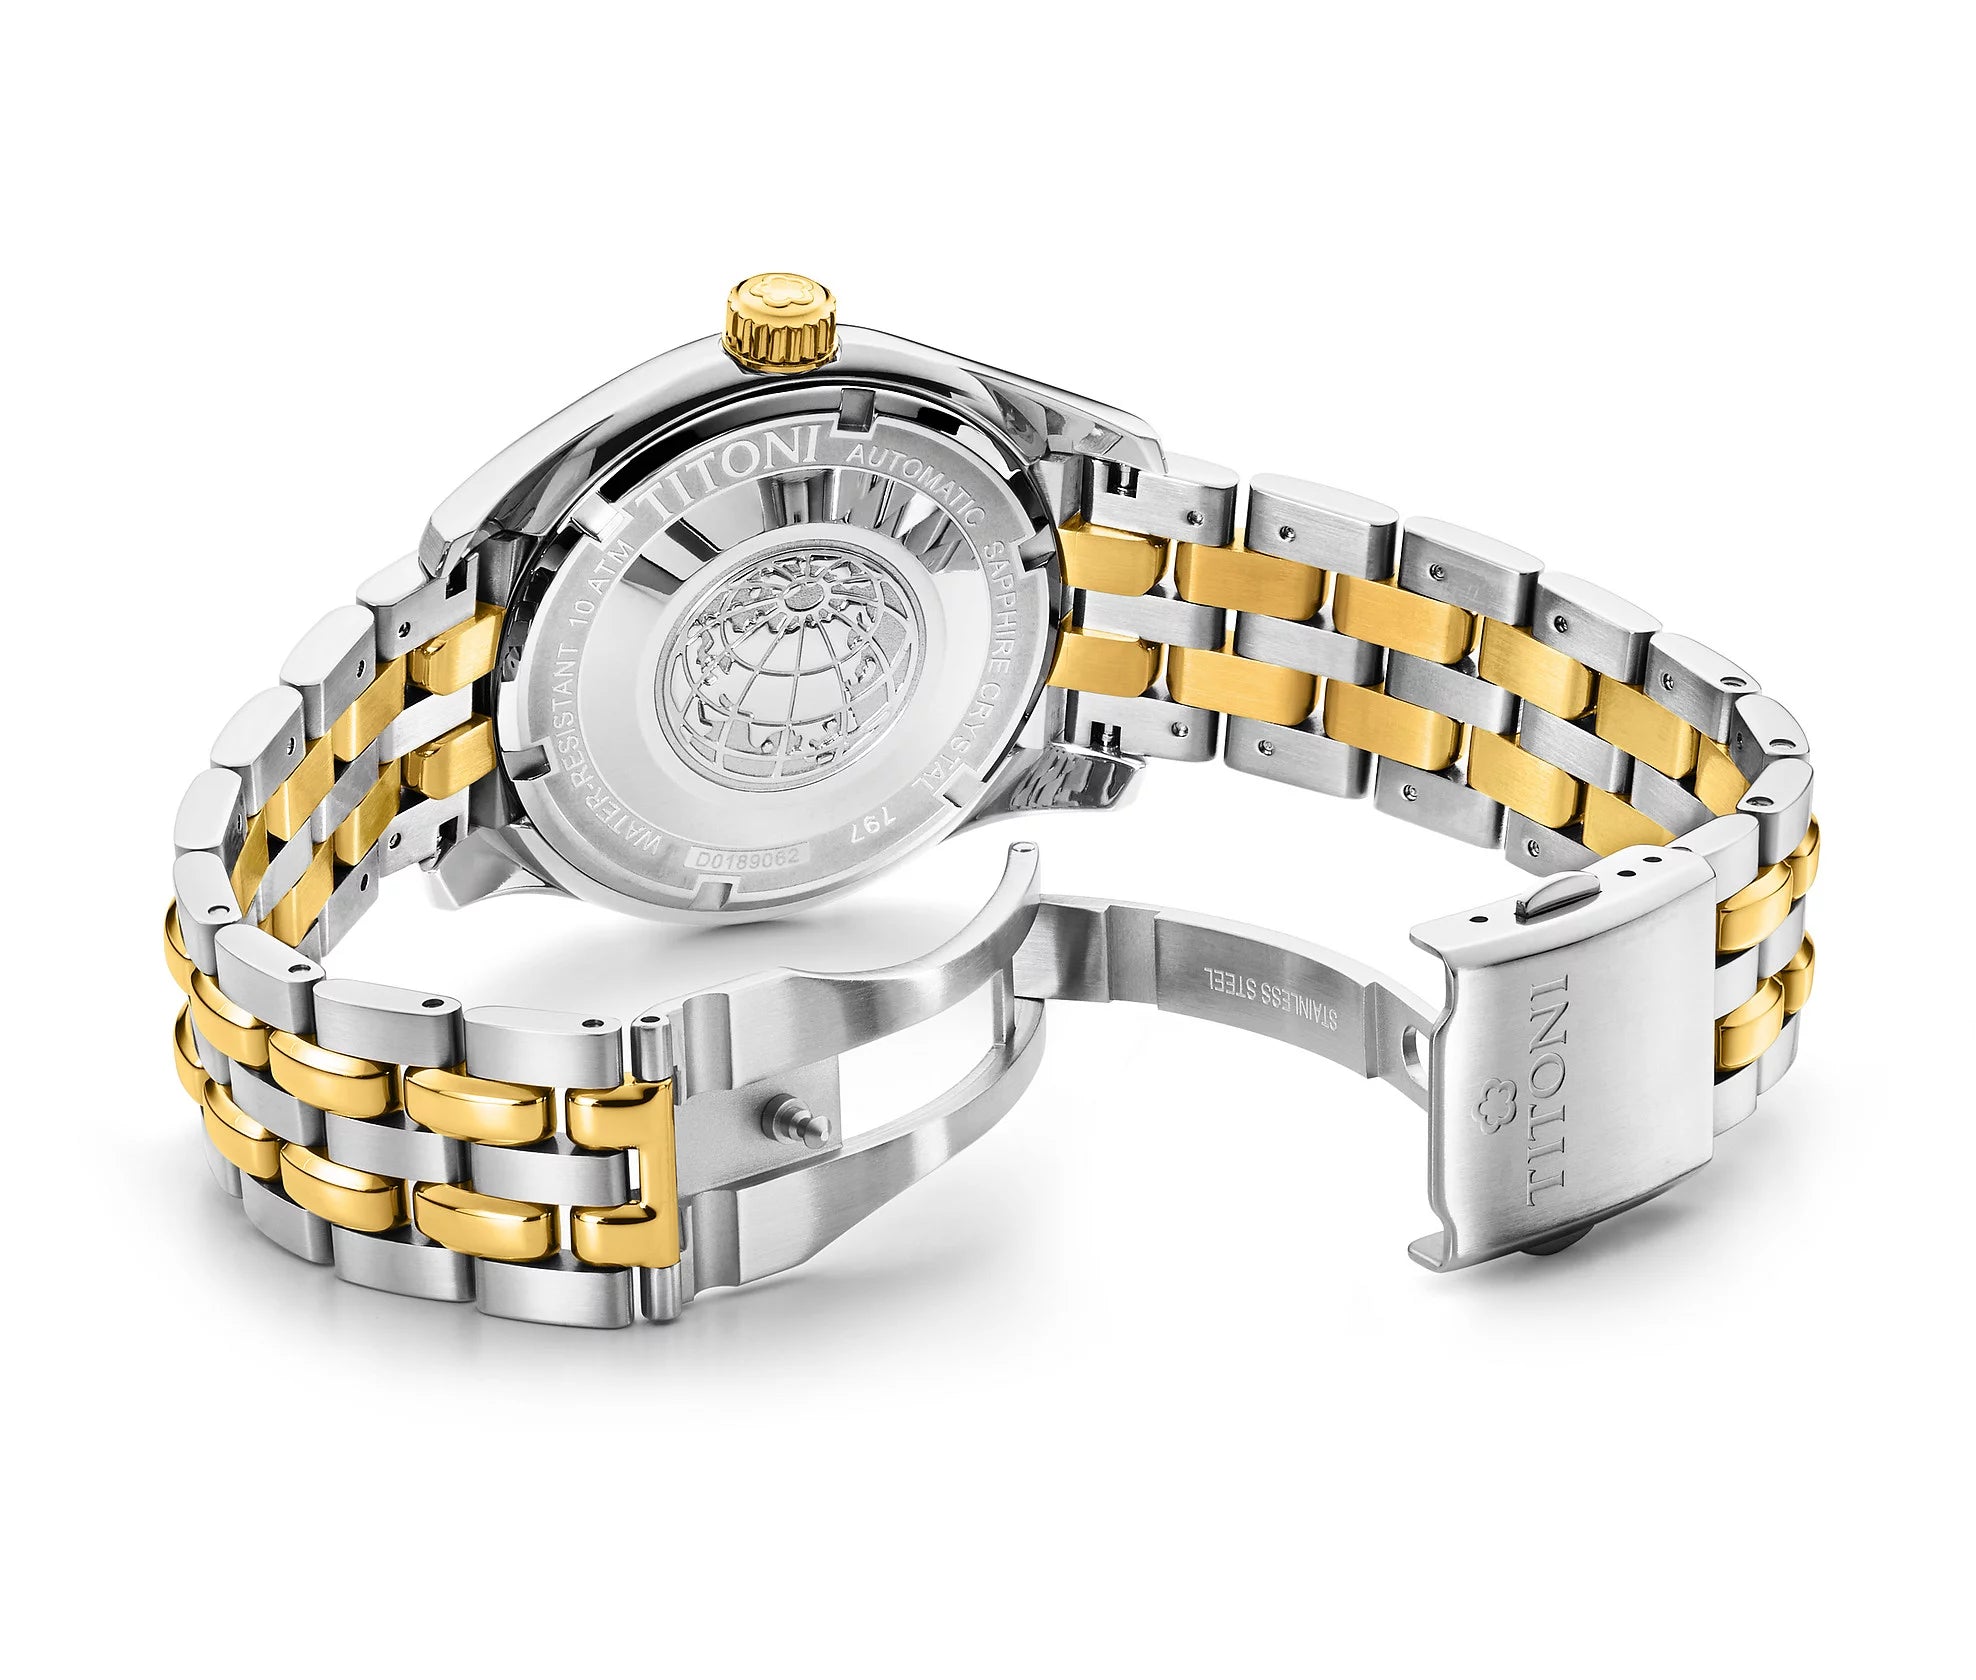 TITONI Cosmo King Automatic Gents Watch 797 SY-DB-019